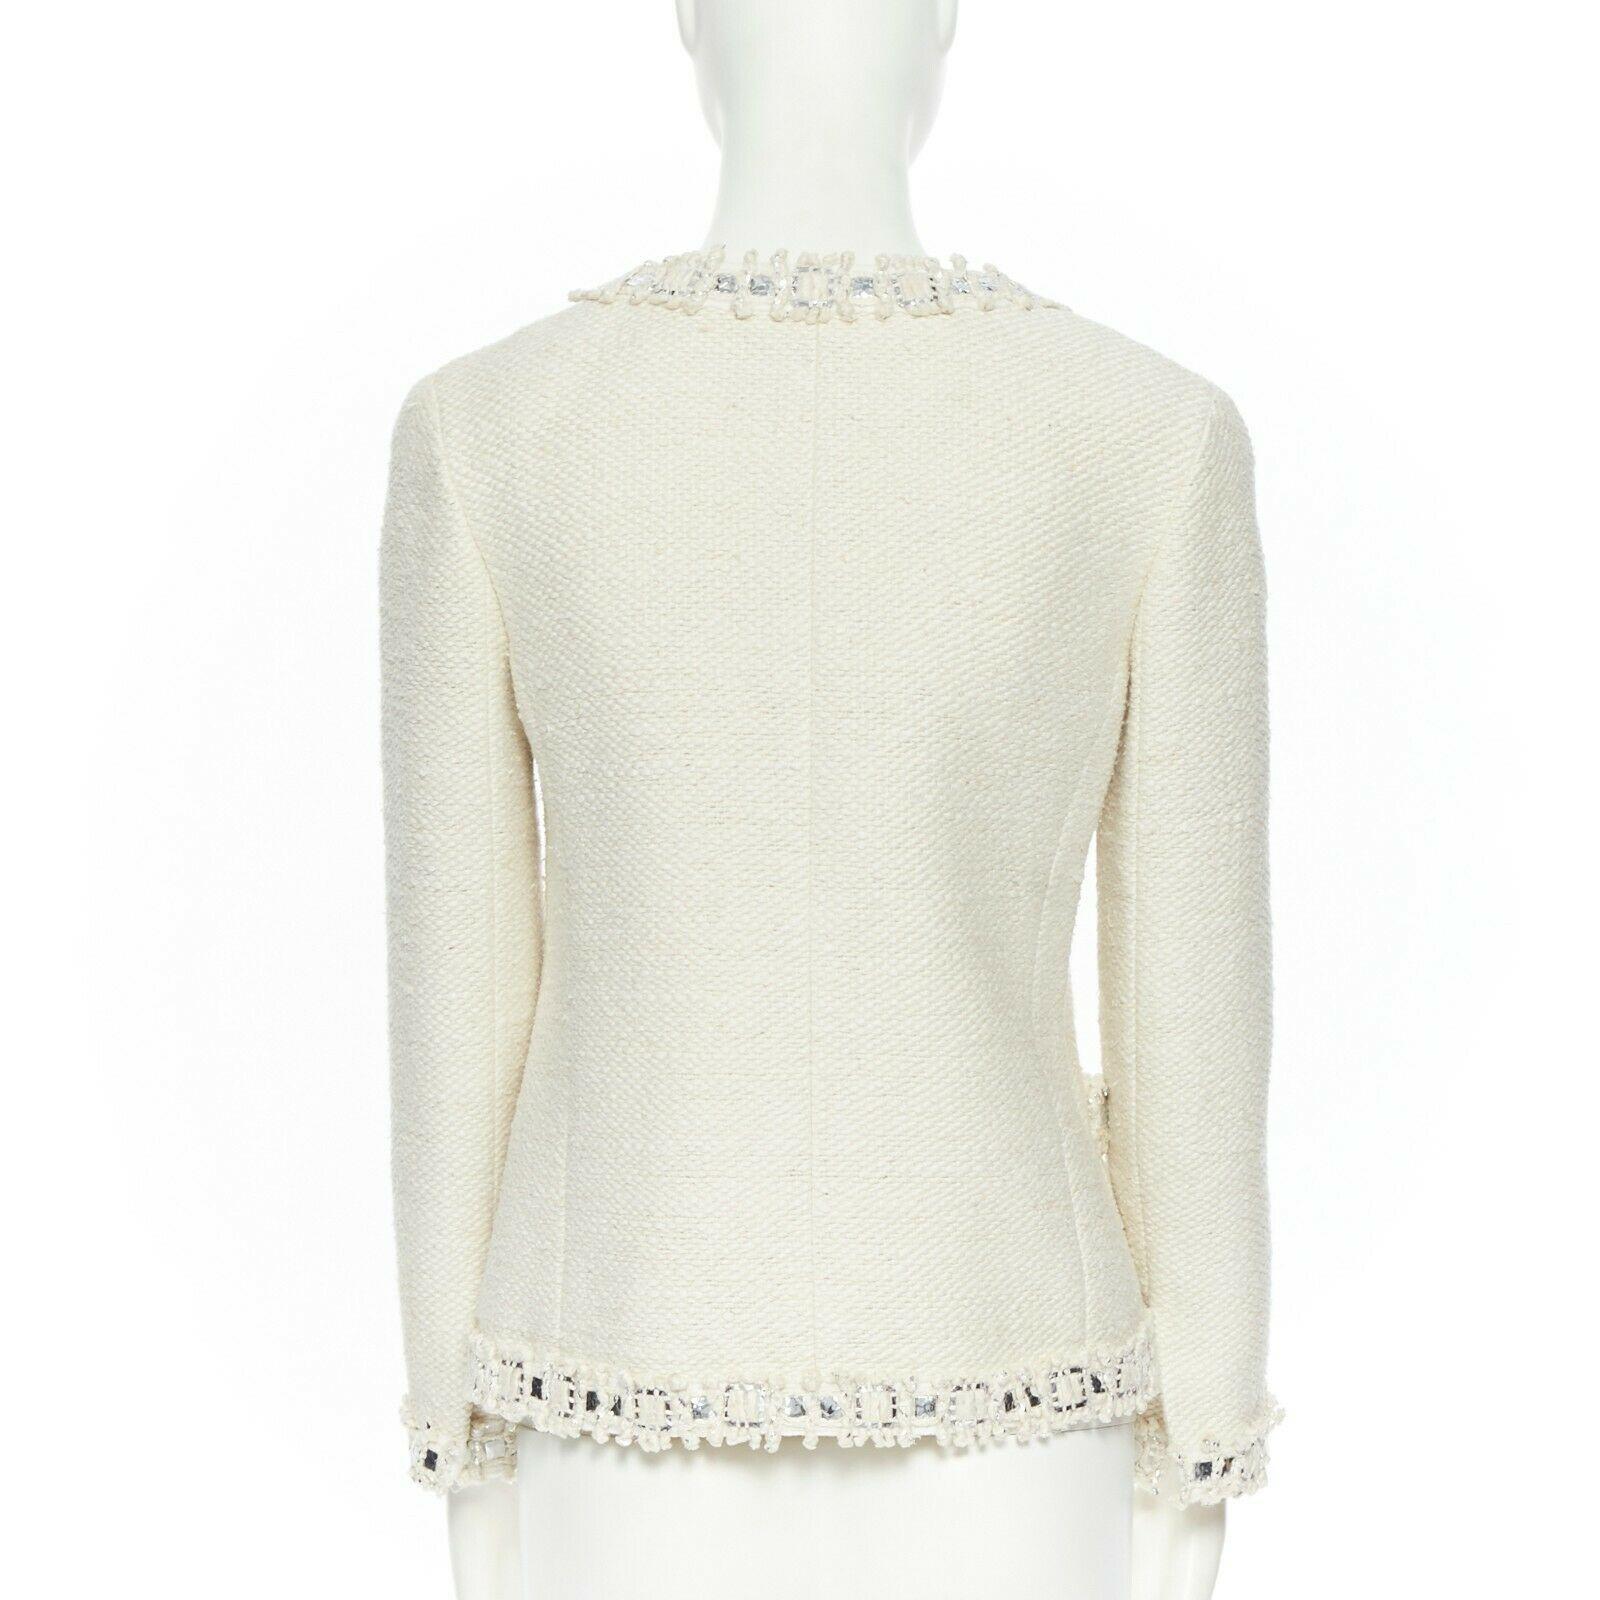 CHANEL classic cream white metallic sequins mixed trimmings tweed jacket FR36 S 3